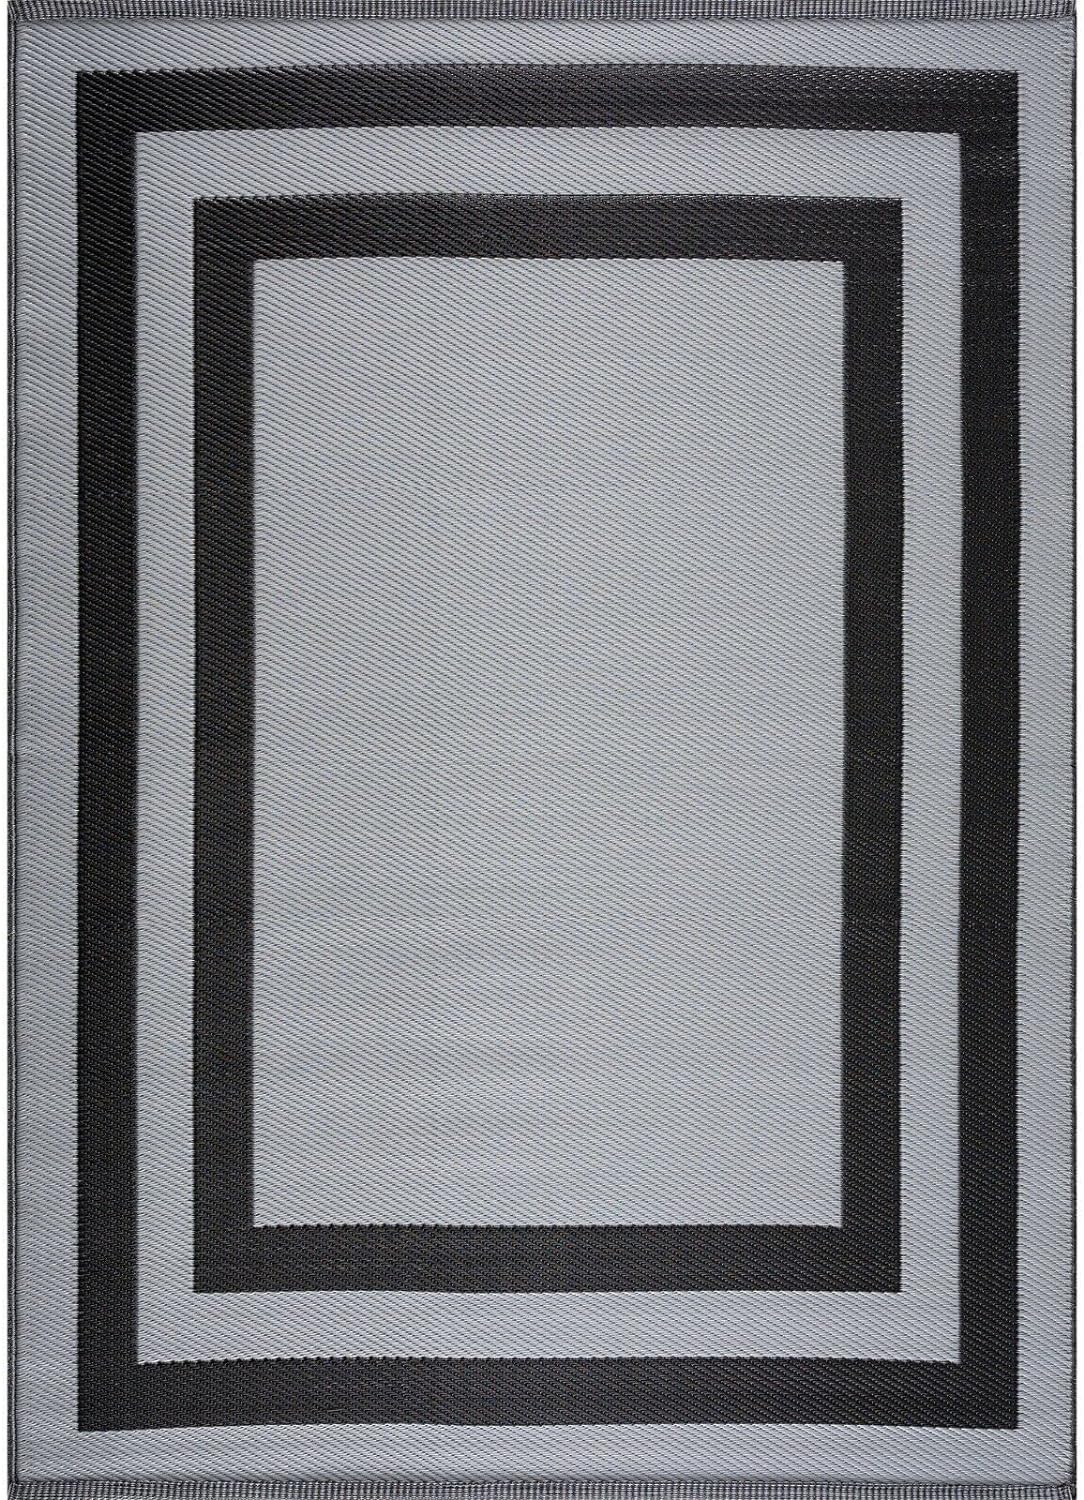 Playa Outdoor Rug - Crease-Free Recycled Plastic Floor Mat for Patio, Camping, Beach, Balcony, Porch, Deck - Weather, Water, Stain, Lightweight, Fade and UV Resistant - Paris- Black & Gray